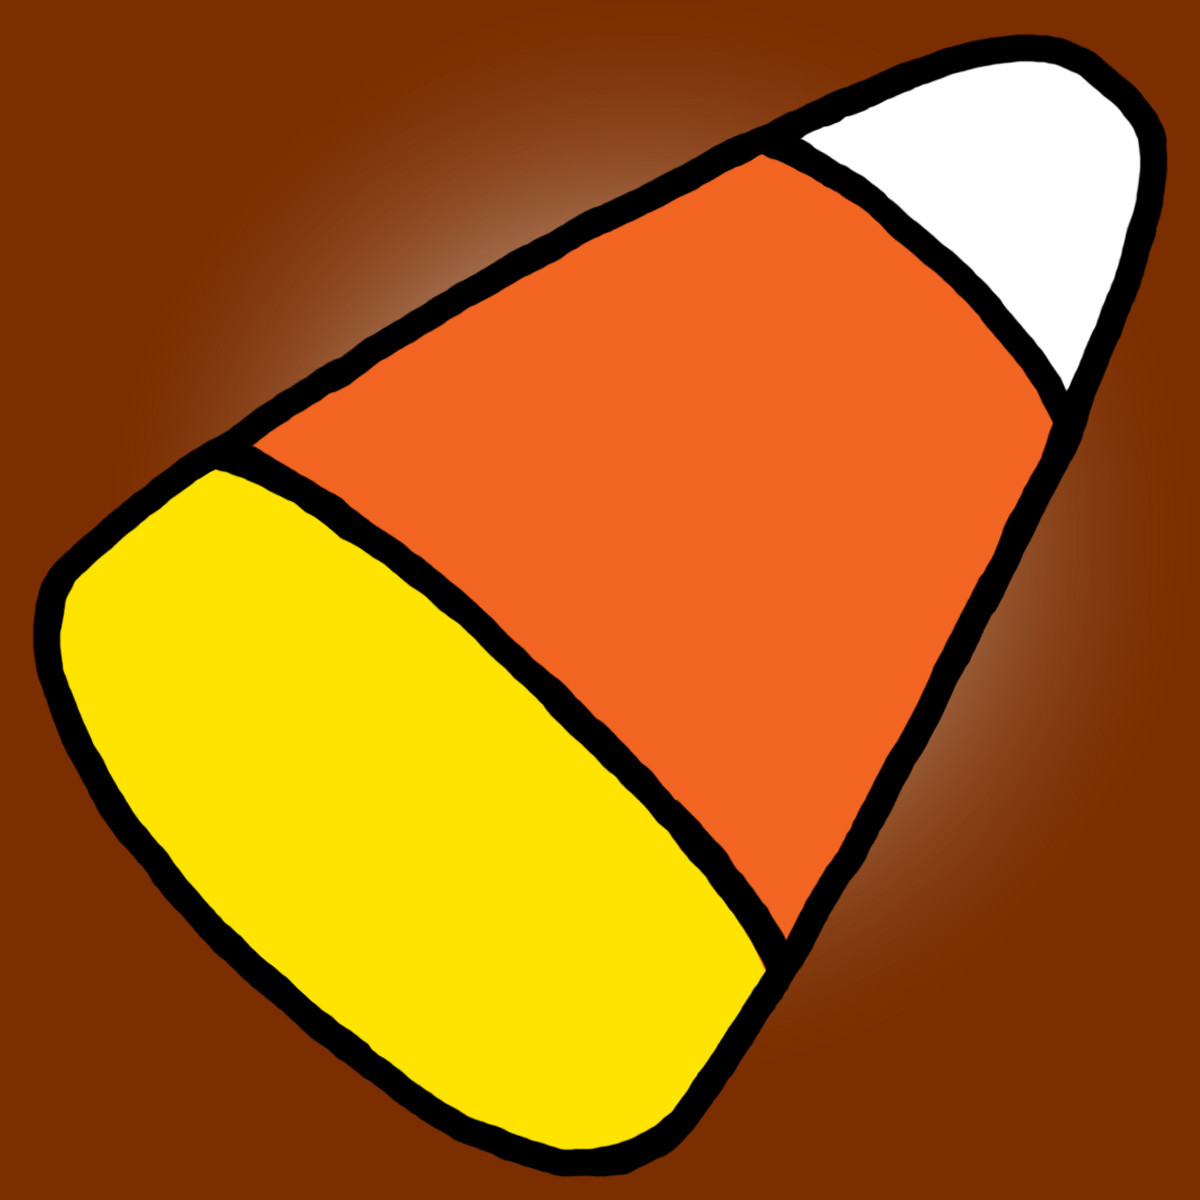 Candy Corn Clipart
 Tackling Life To her The candy corn debacle